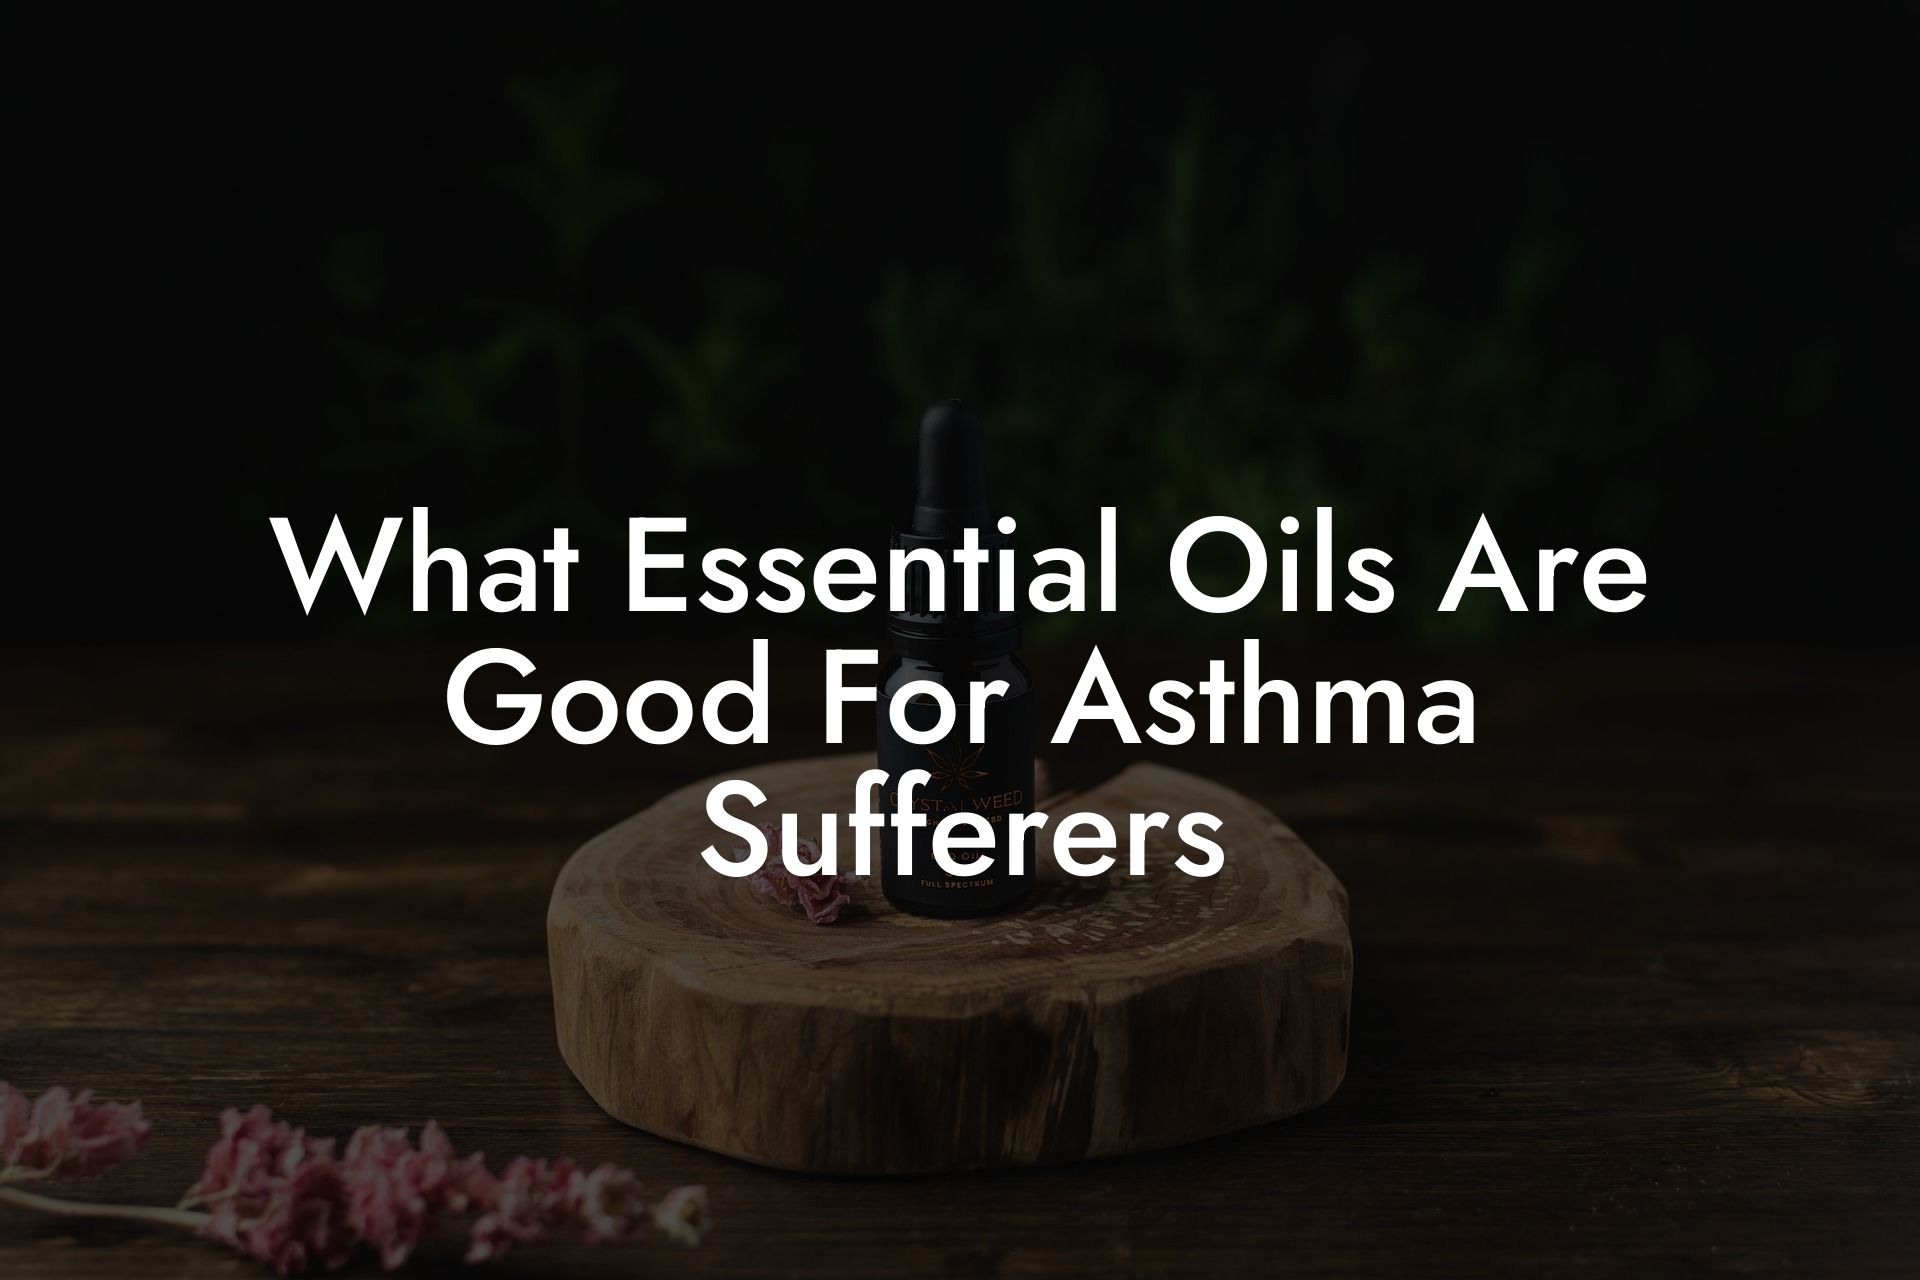 What Essential Oils Are Good For Asthma Sufferers